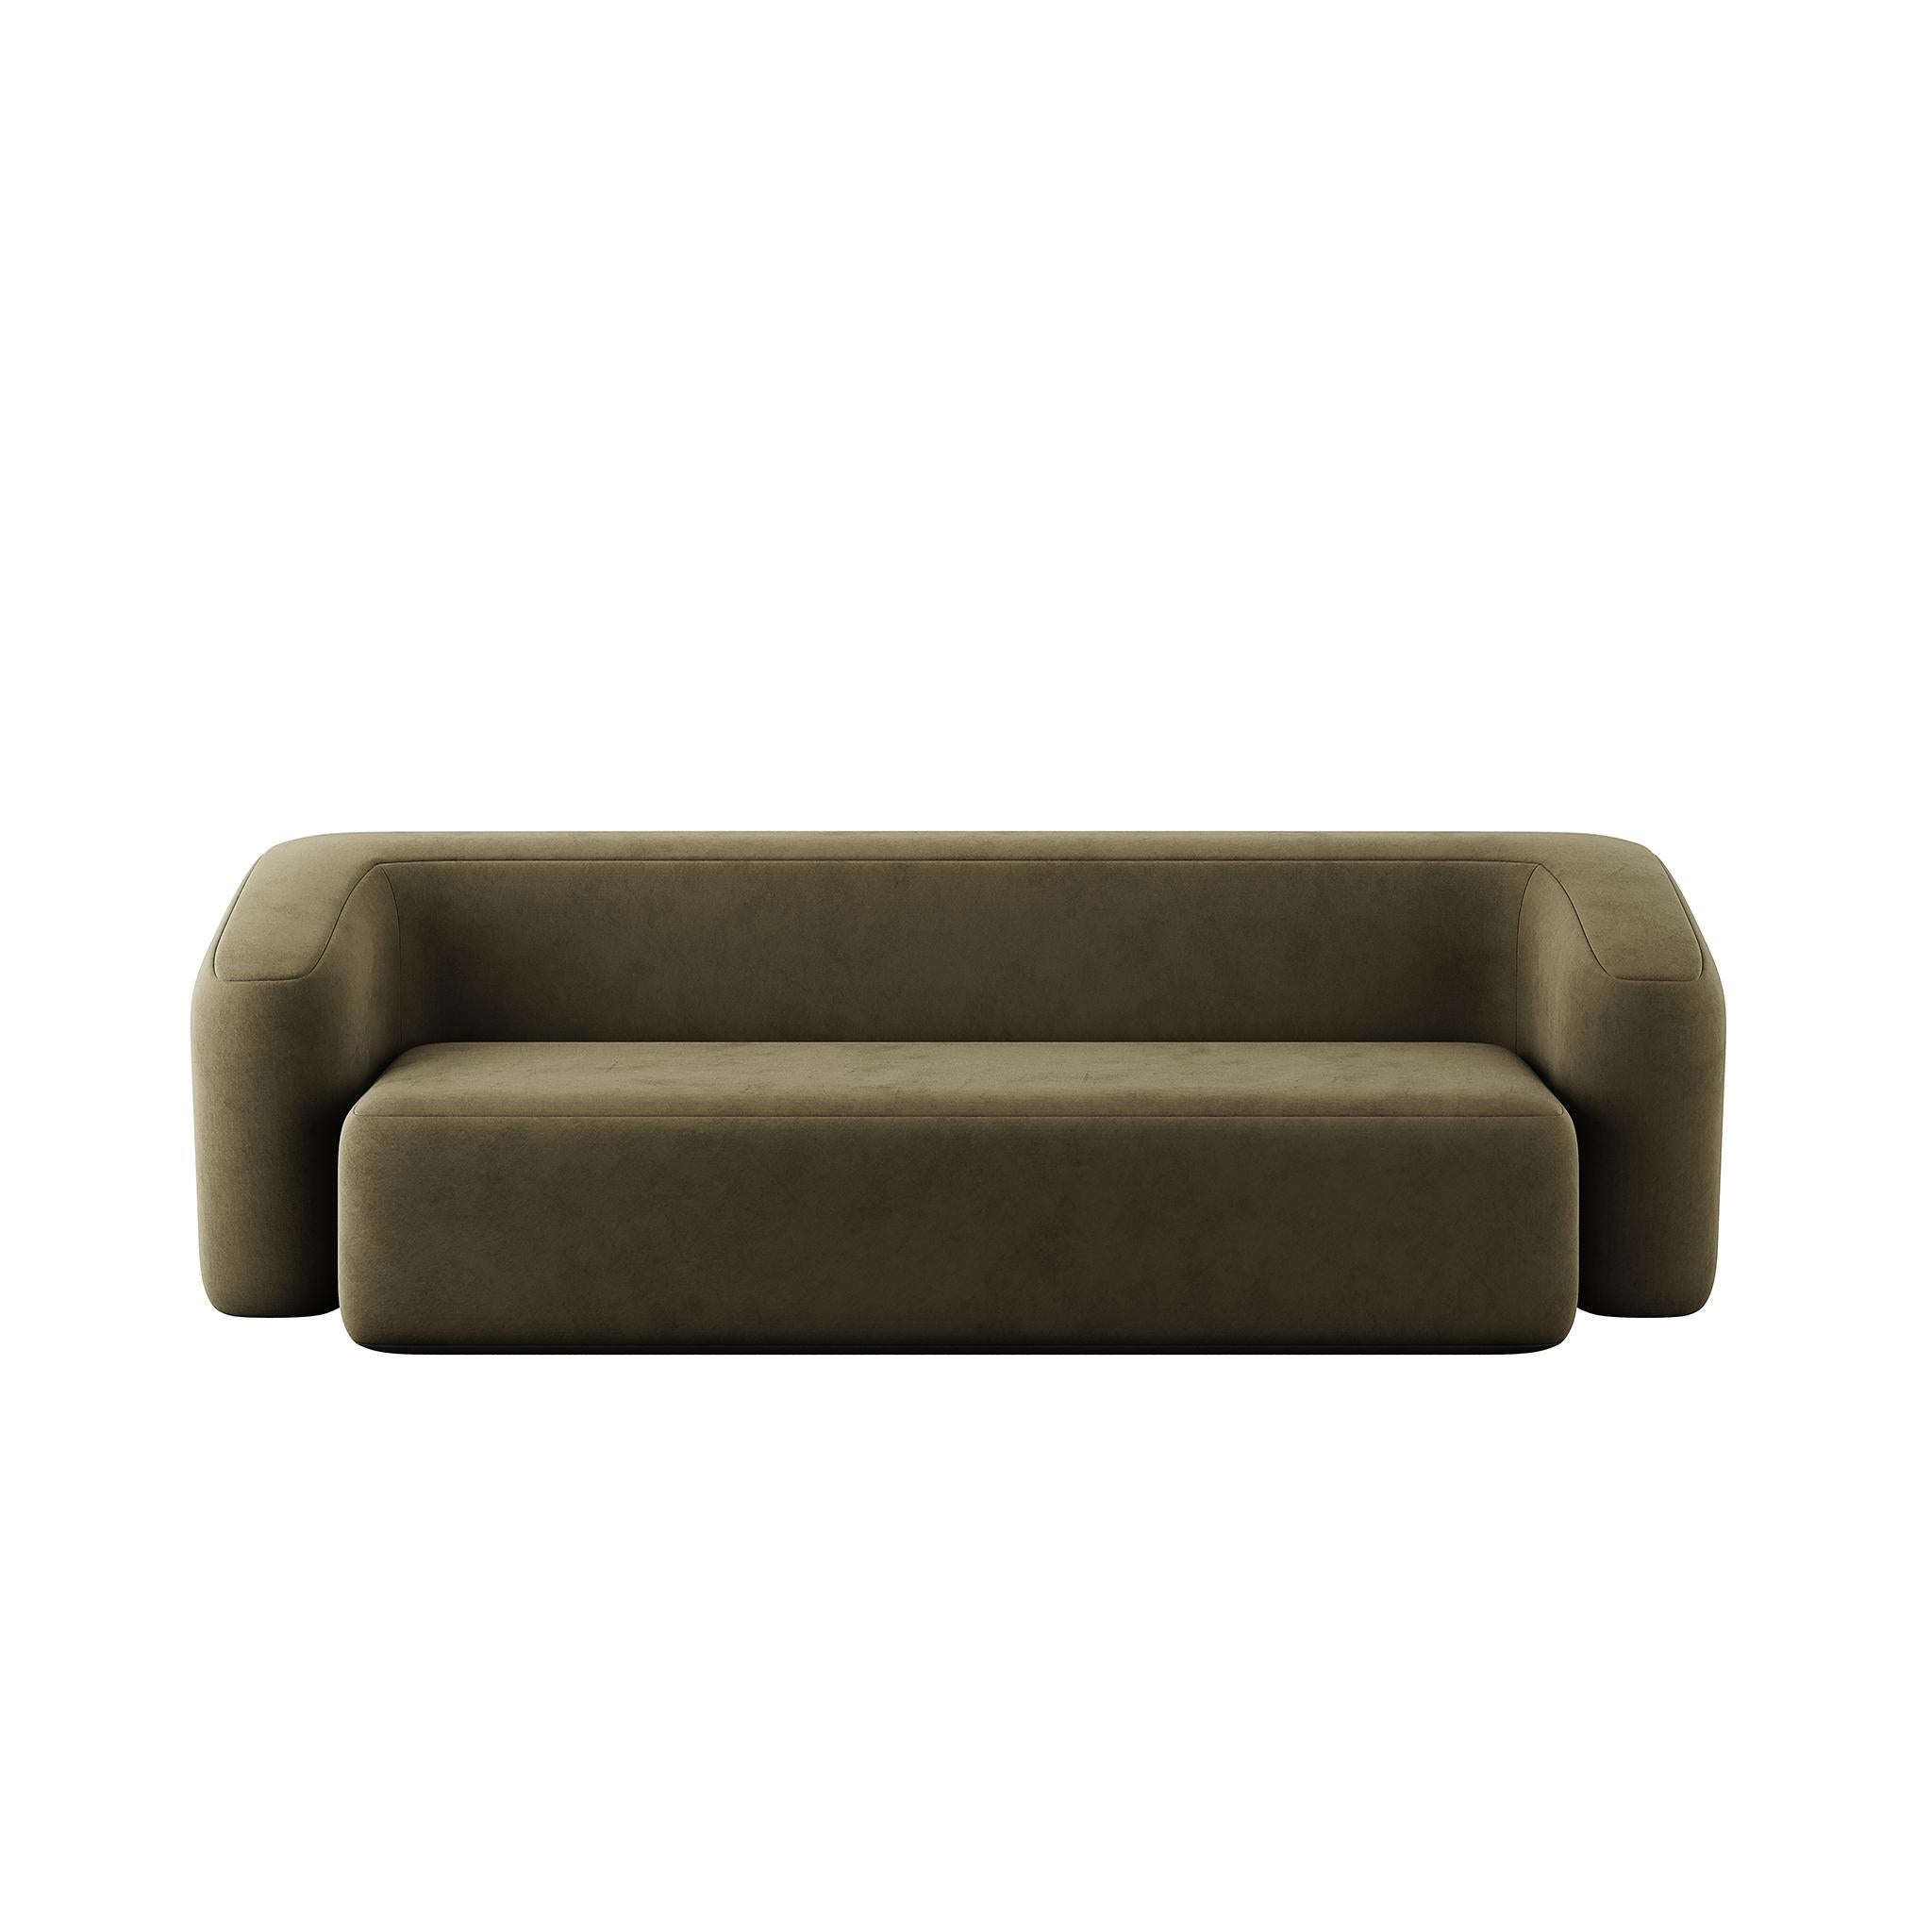 Step into the embrace of nature-inspired luxury with our Full Upholstered Sofa in Green Forest Suede.
This sofa is not merely furniture; it’s a verdant sanctuary that brings the soothing essence of a forest into the heart of your living